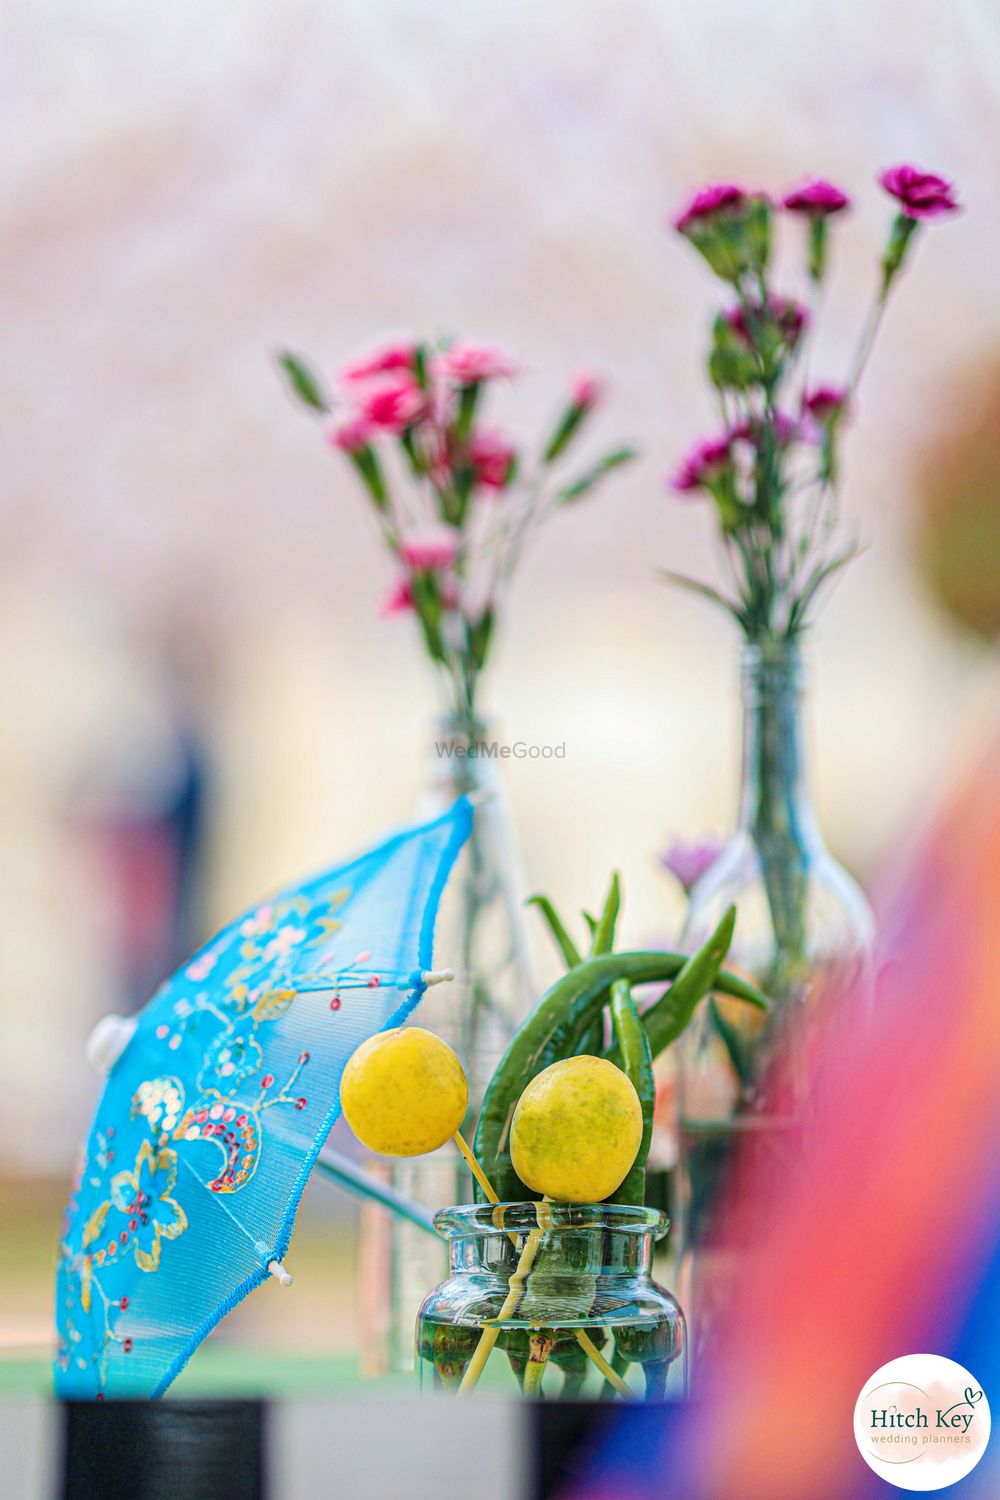 Photo From Bonhomie of vibrant hues - By Hitchkey Weddings